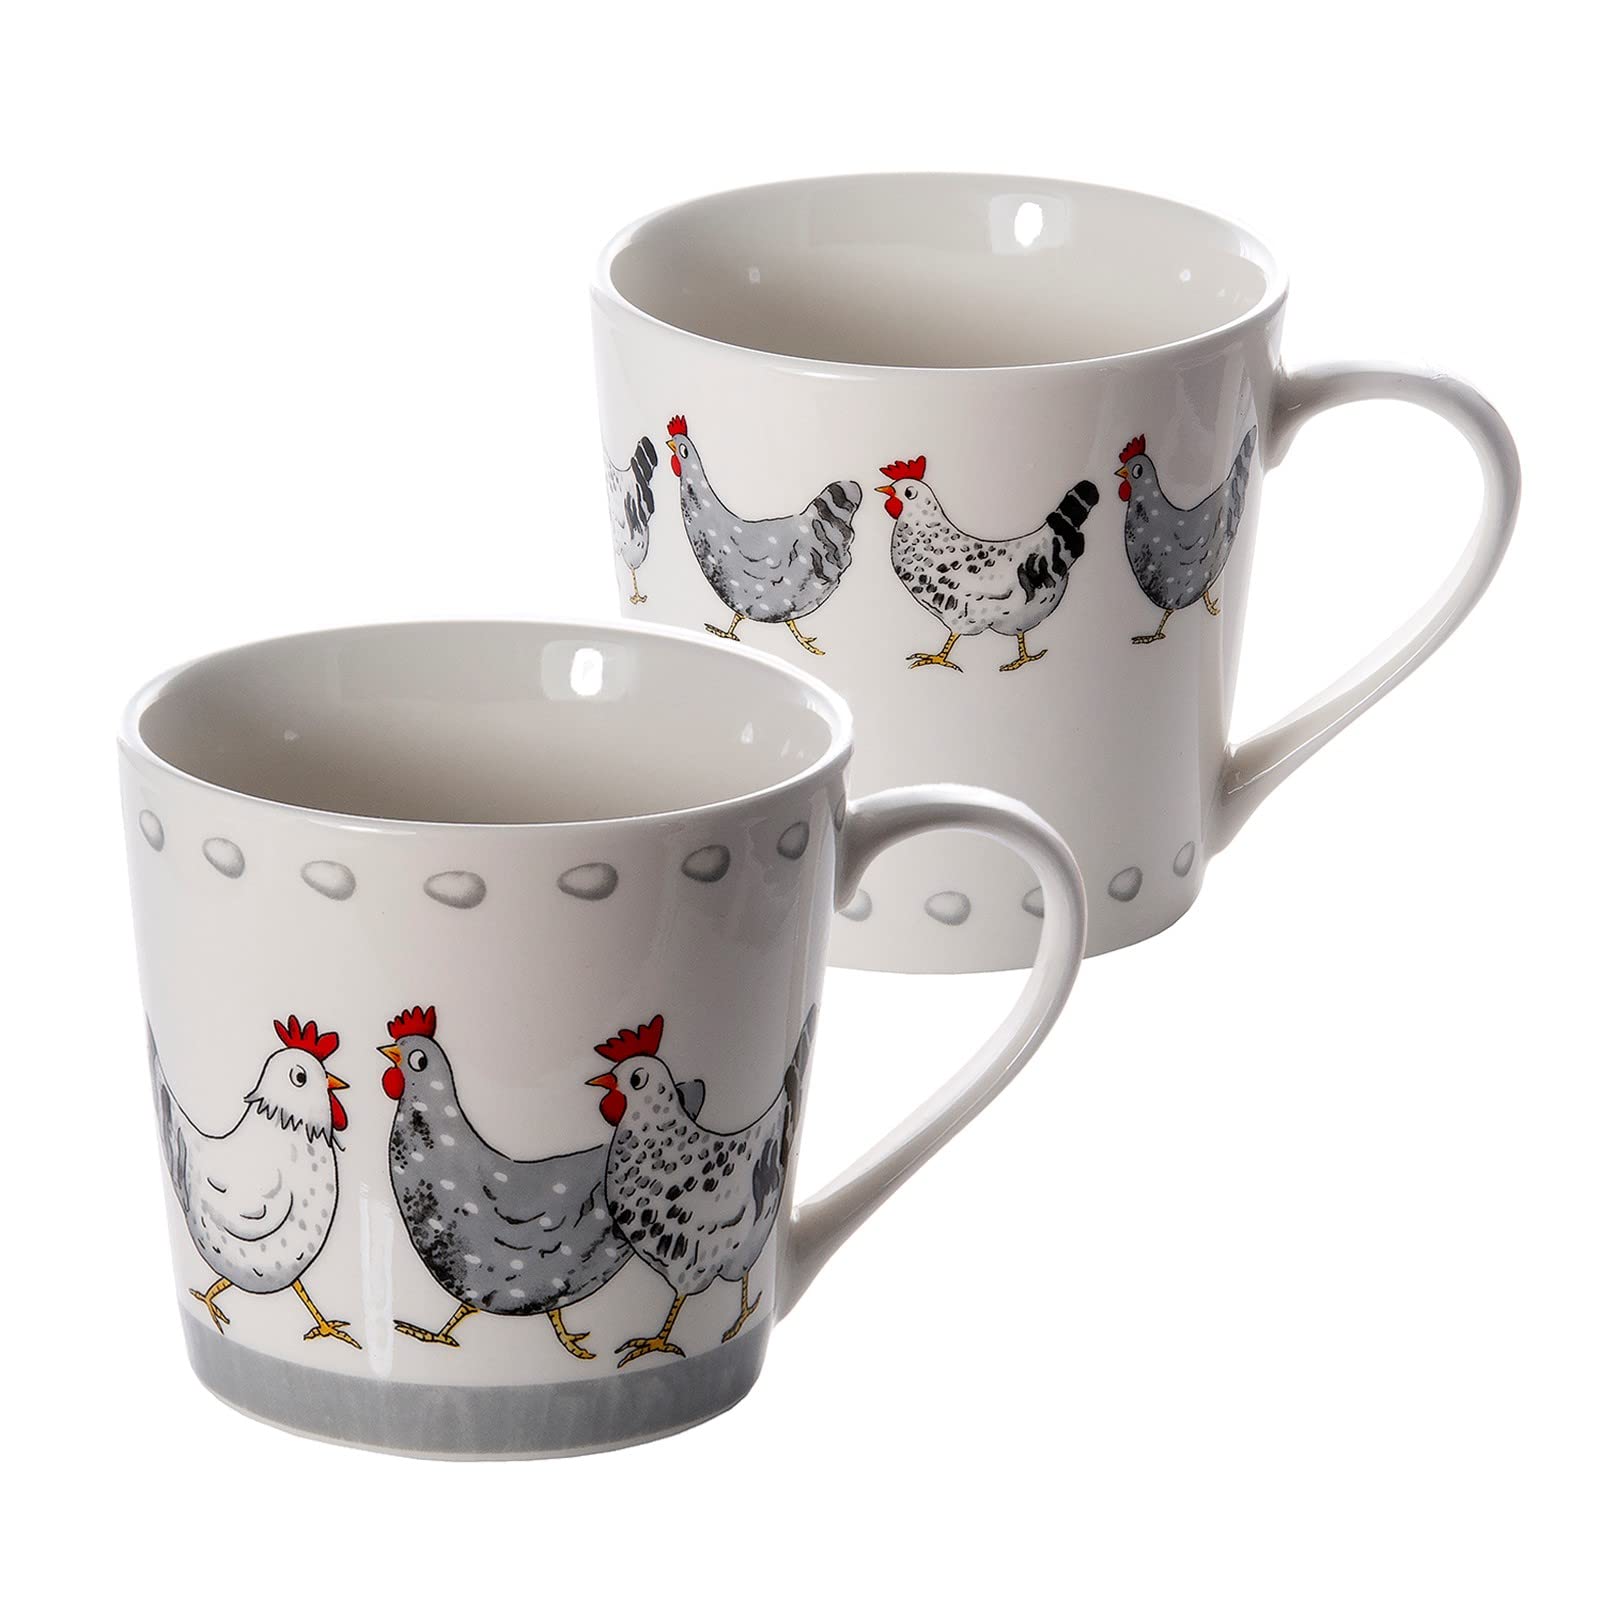 SPOTTED DOG GIFT COMPANY Chicken Coffee Mug Set of 4, Tea Mugs Cups 13oz Ceramic Porcelain China, Chicken Gifts for Chicken Lovers Women Men